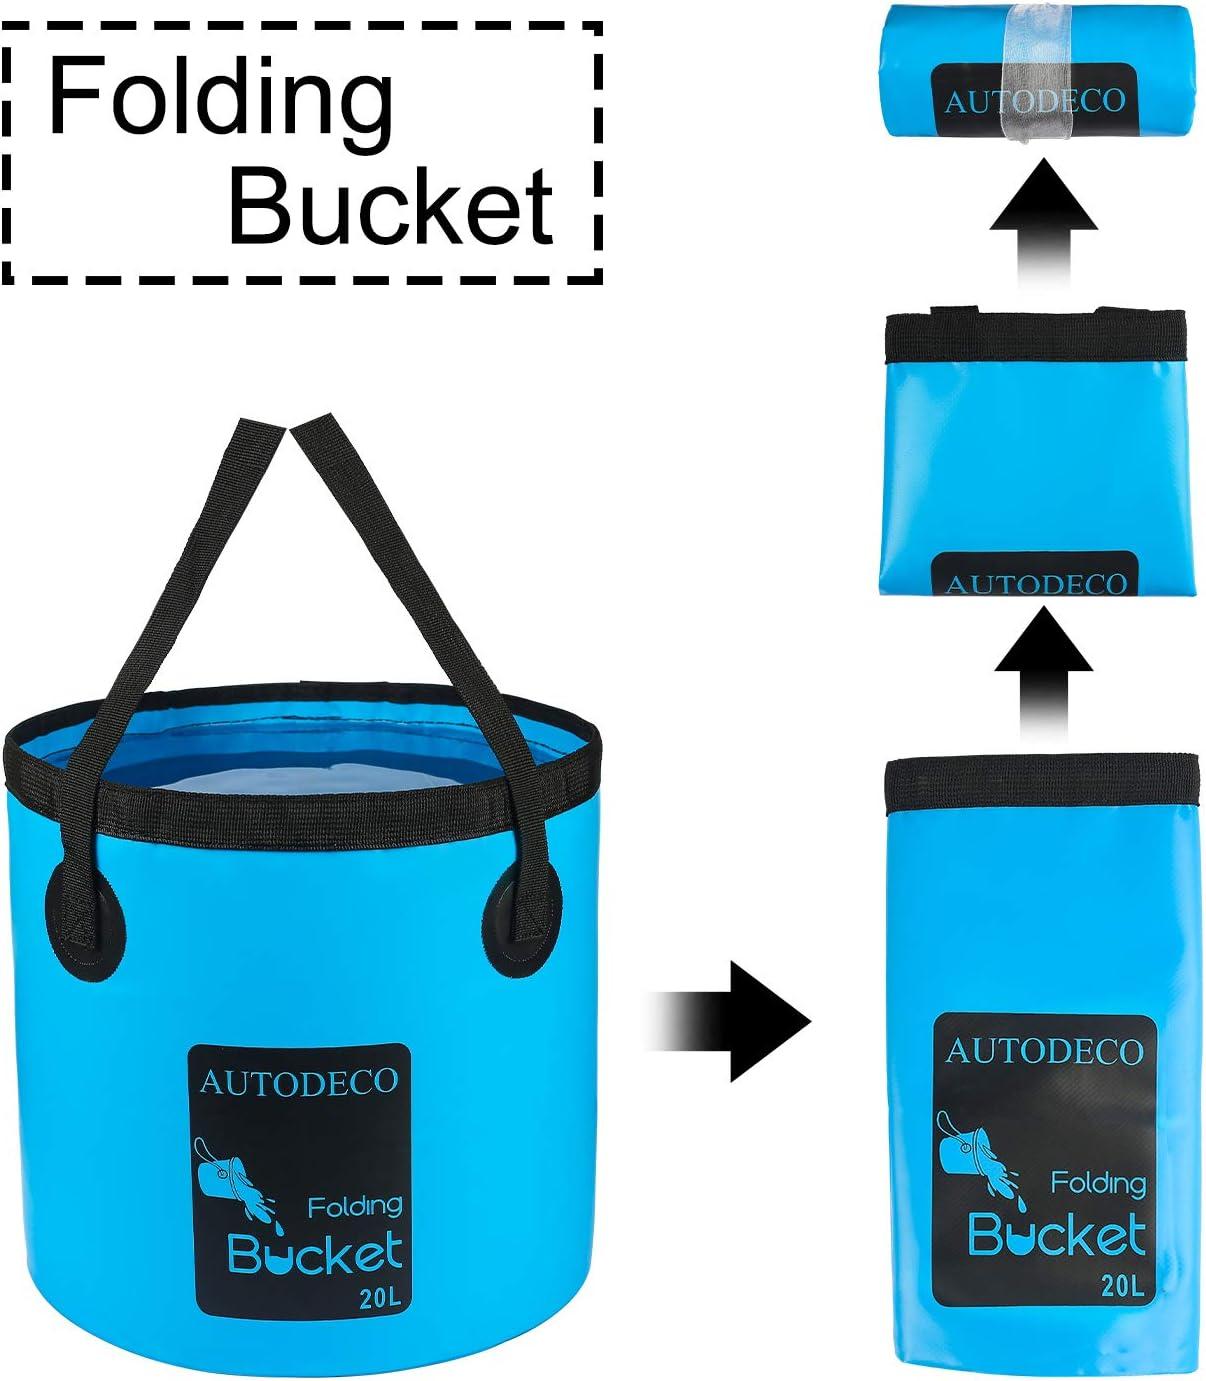 Collapsible Bucket 5 Gallon Container Folding Water Bucket Portable Wash  Basin